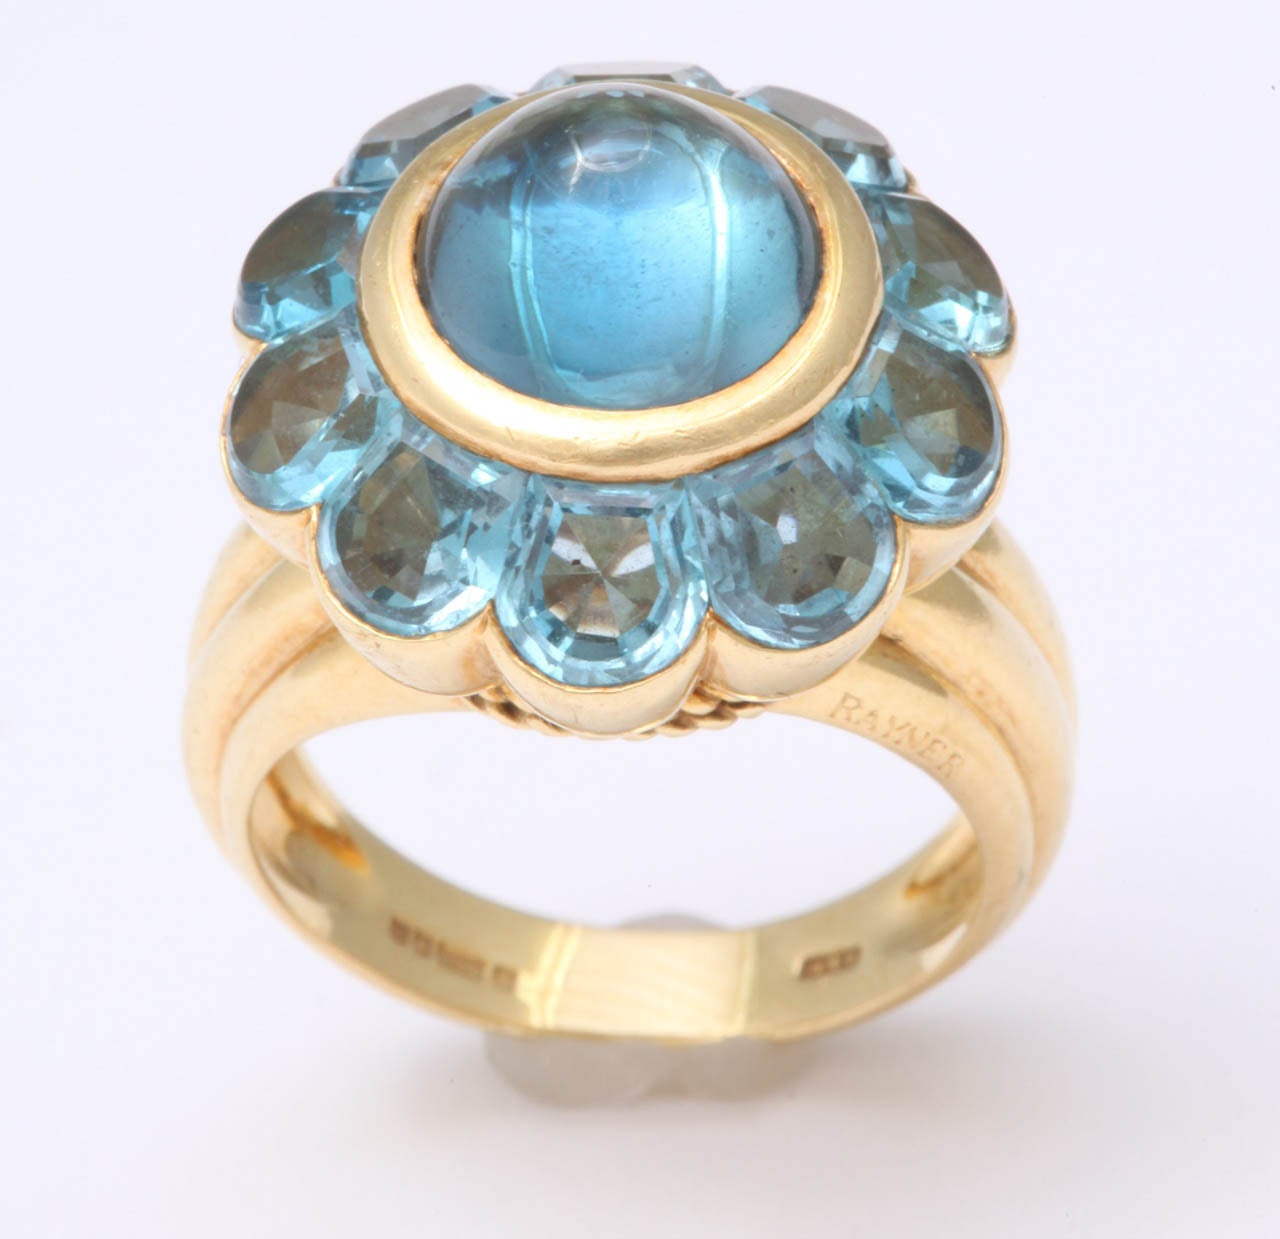 18Kt Yellow Gold ring set with Faceted Blue Topaz stones and a center Cabochon Blue Topaz  stone.  Signed Rayner on the outer shank and marked with British gold marks on the interior shank.